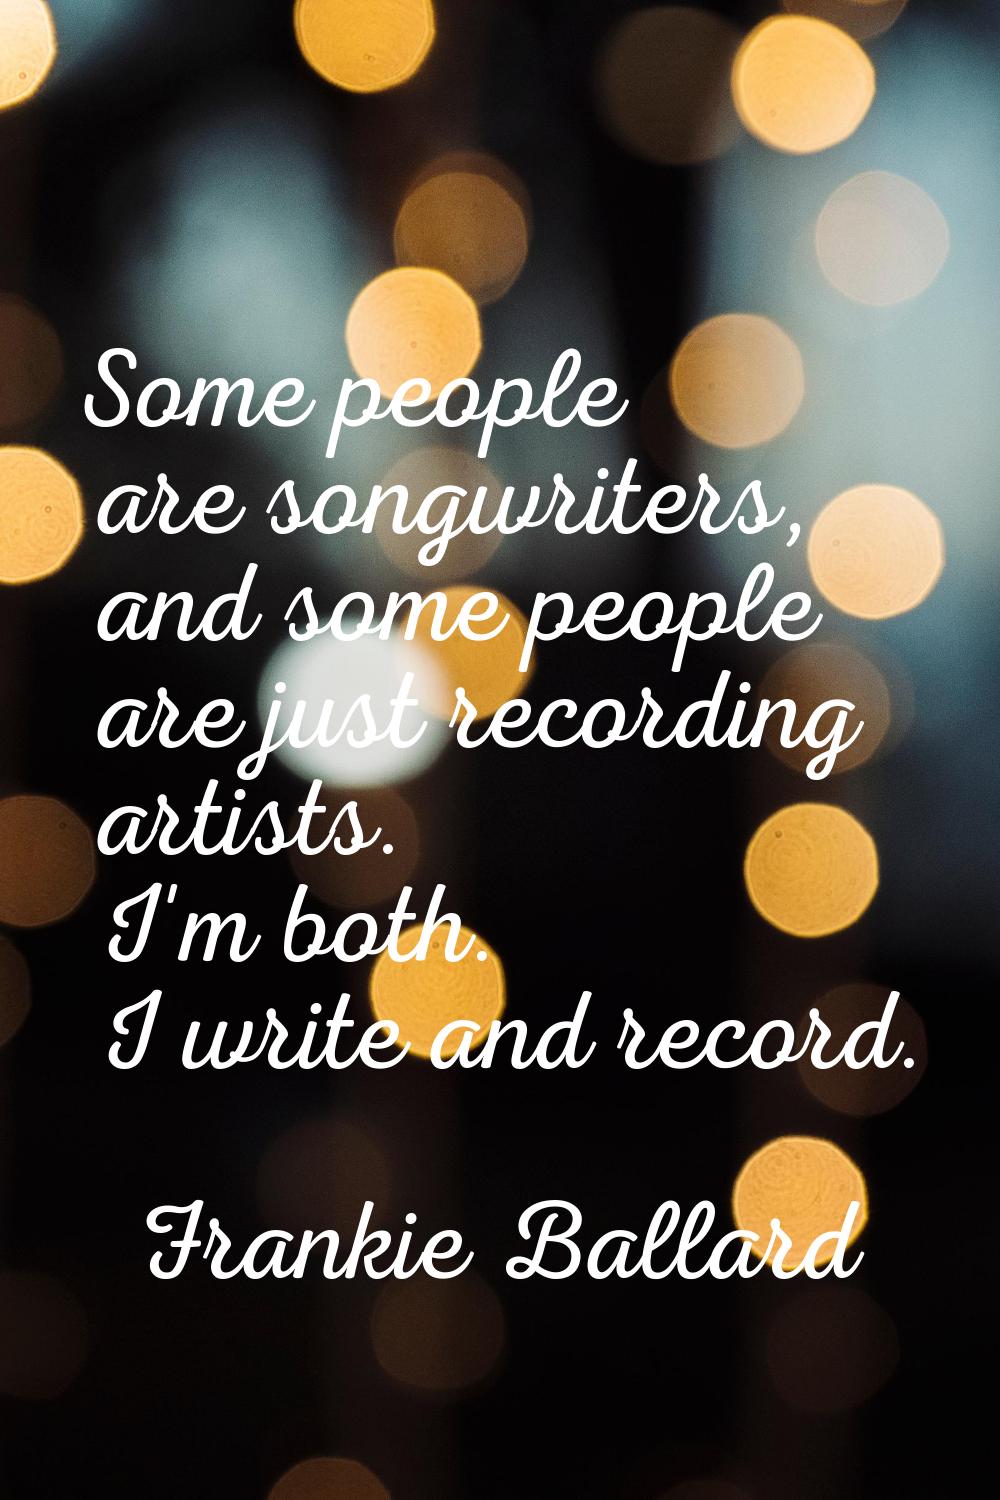 Some people are songwriters, and some people are just recording artists. I'm both. I write and reco